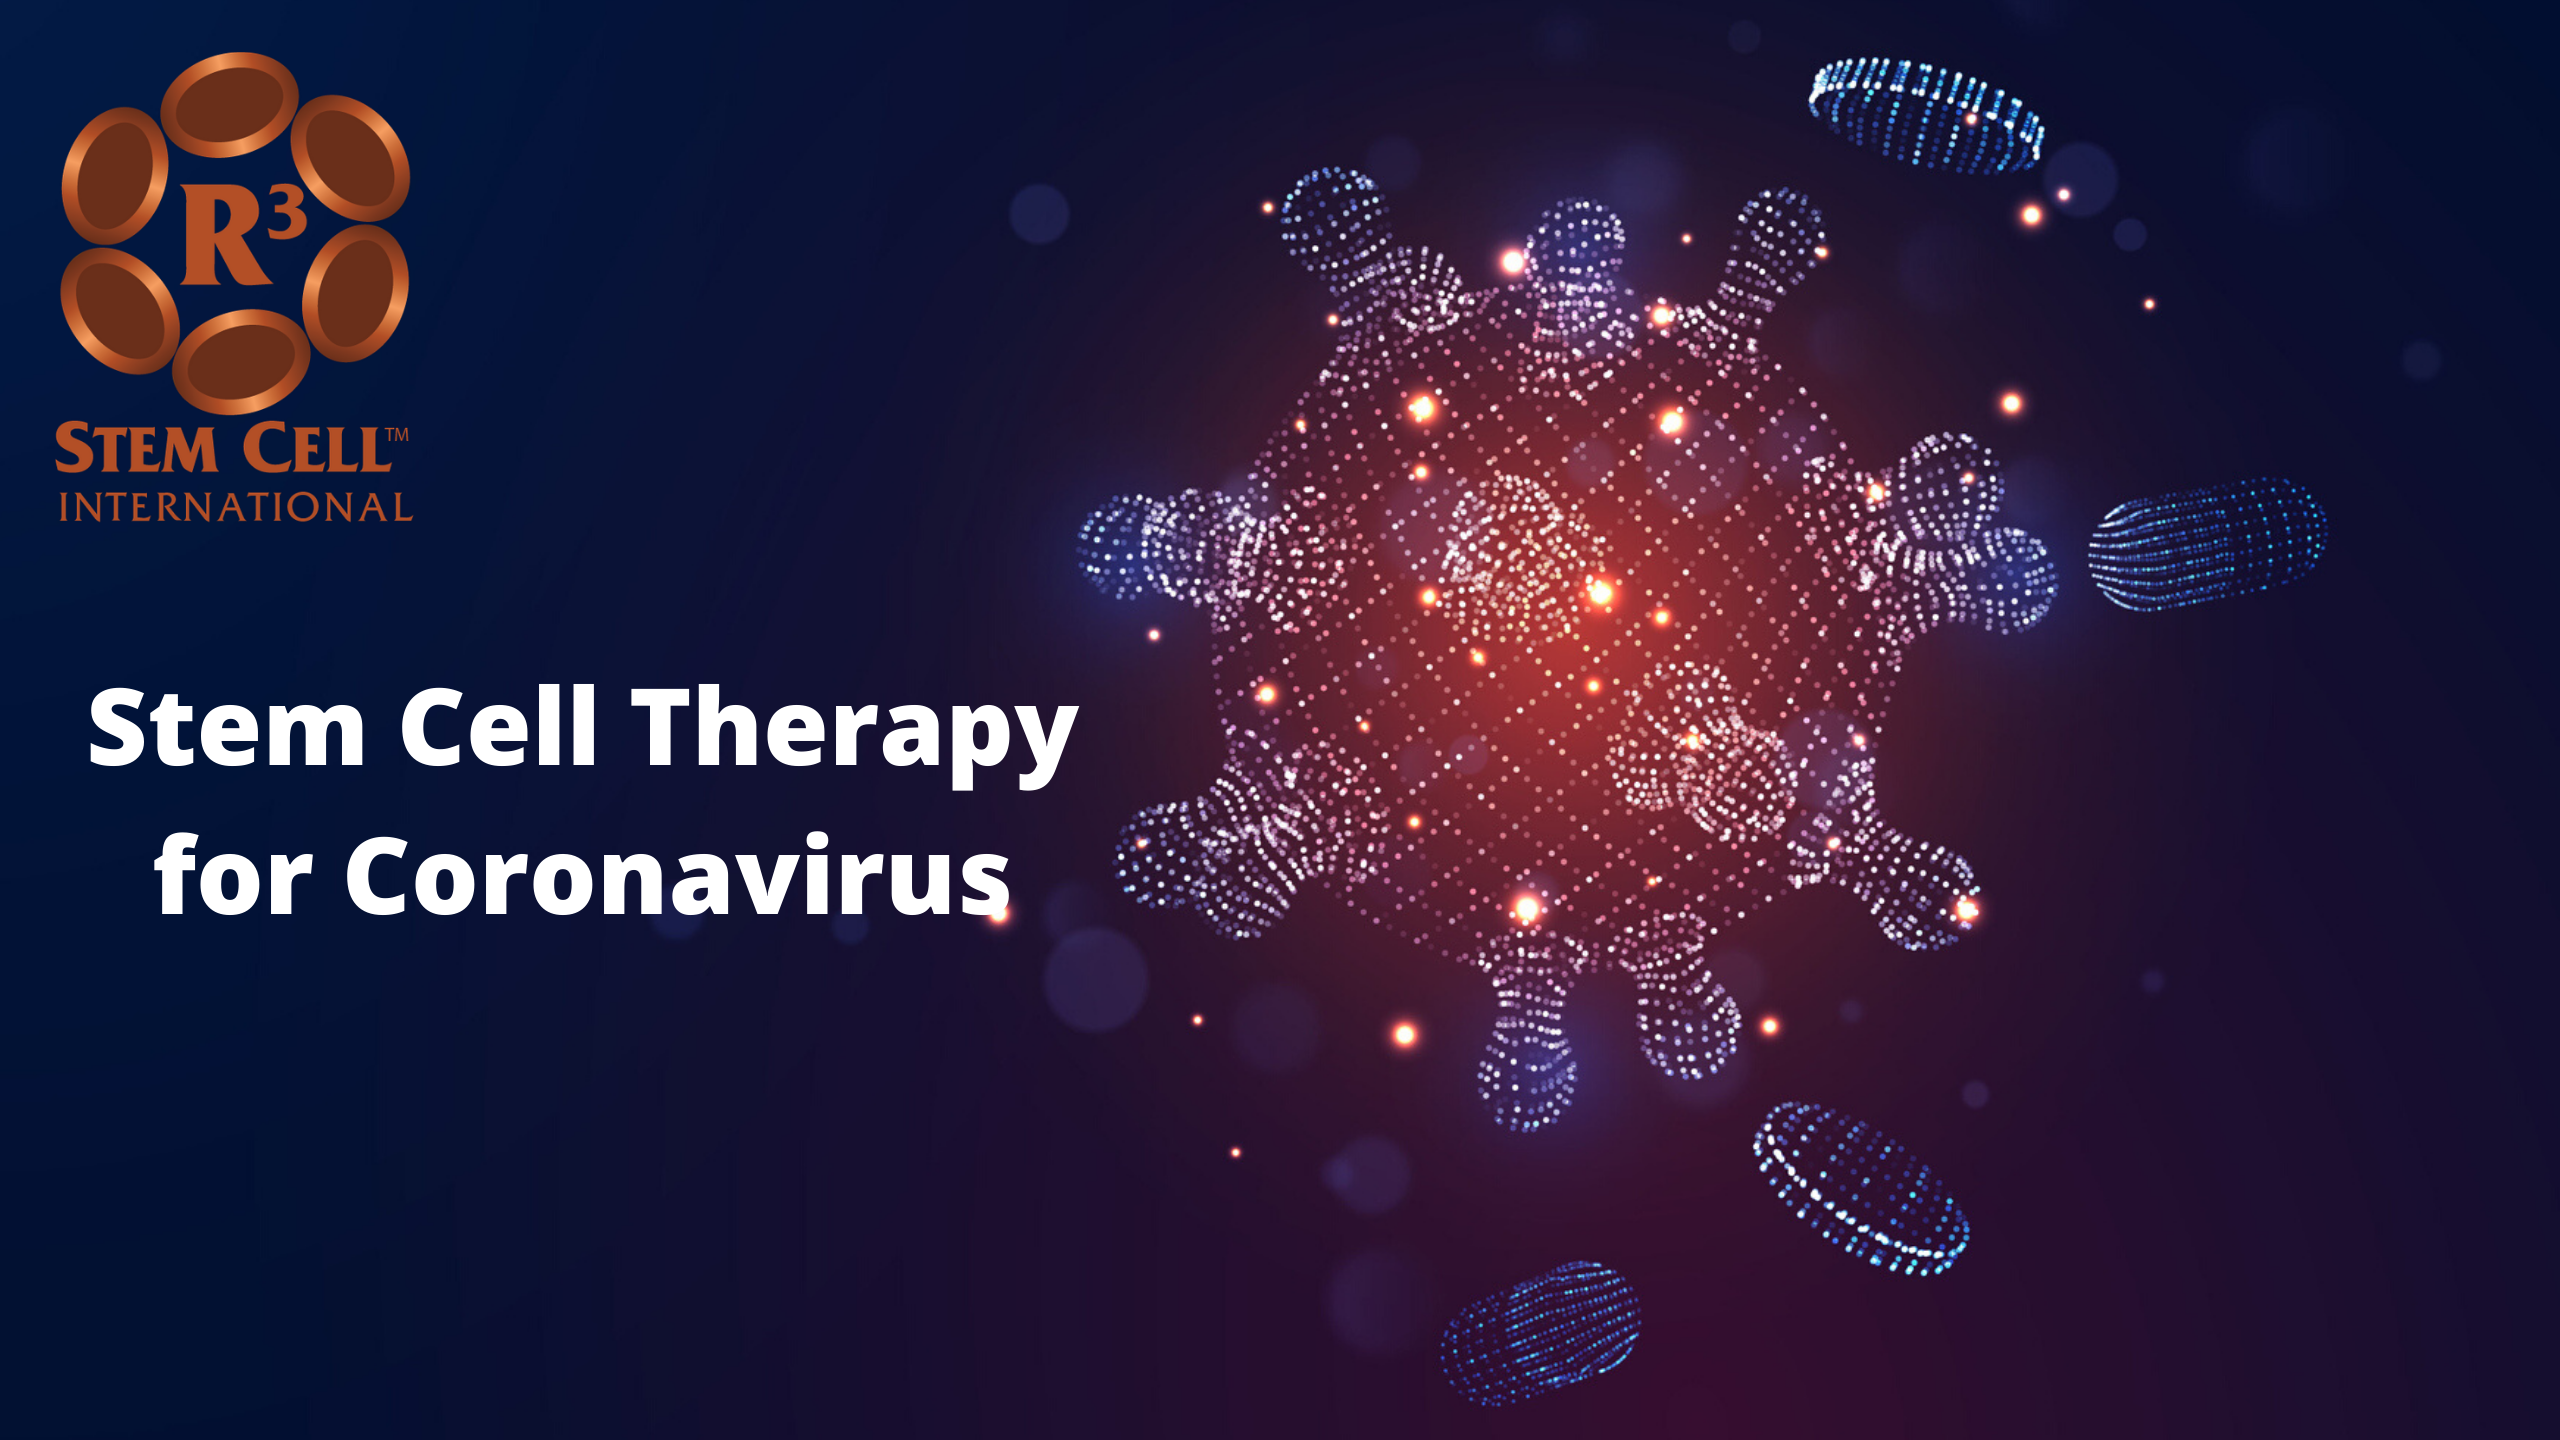 R3 International Now Offering Stem Cell Therapy for Coronavirus in Mexico